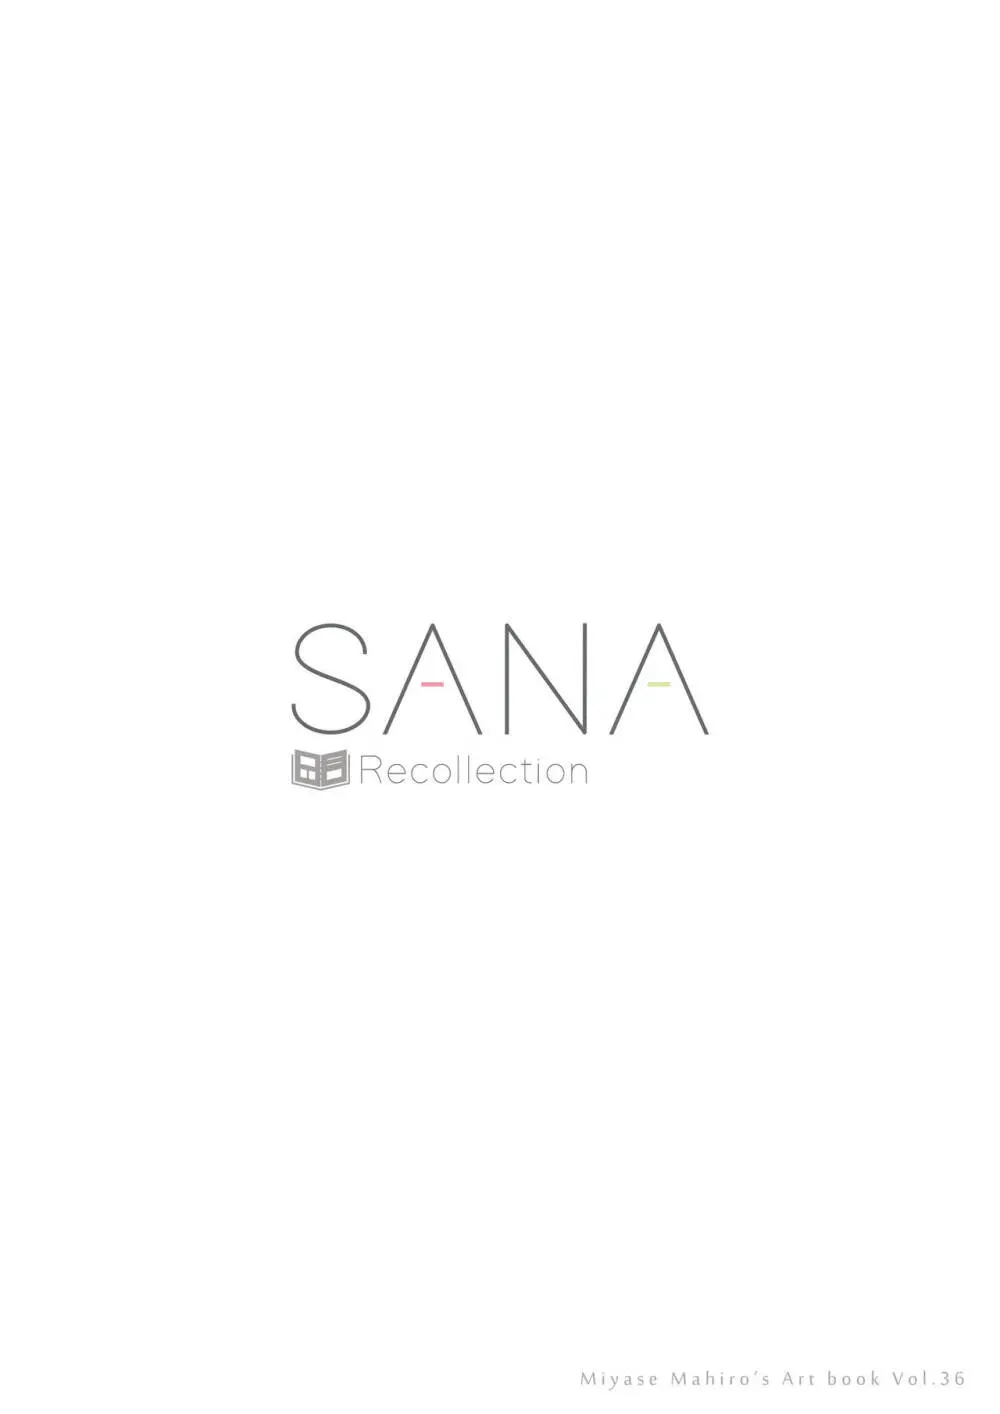 SANA-Recollection + おまけ本 Page.87